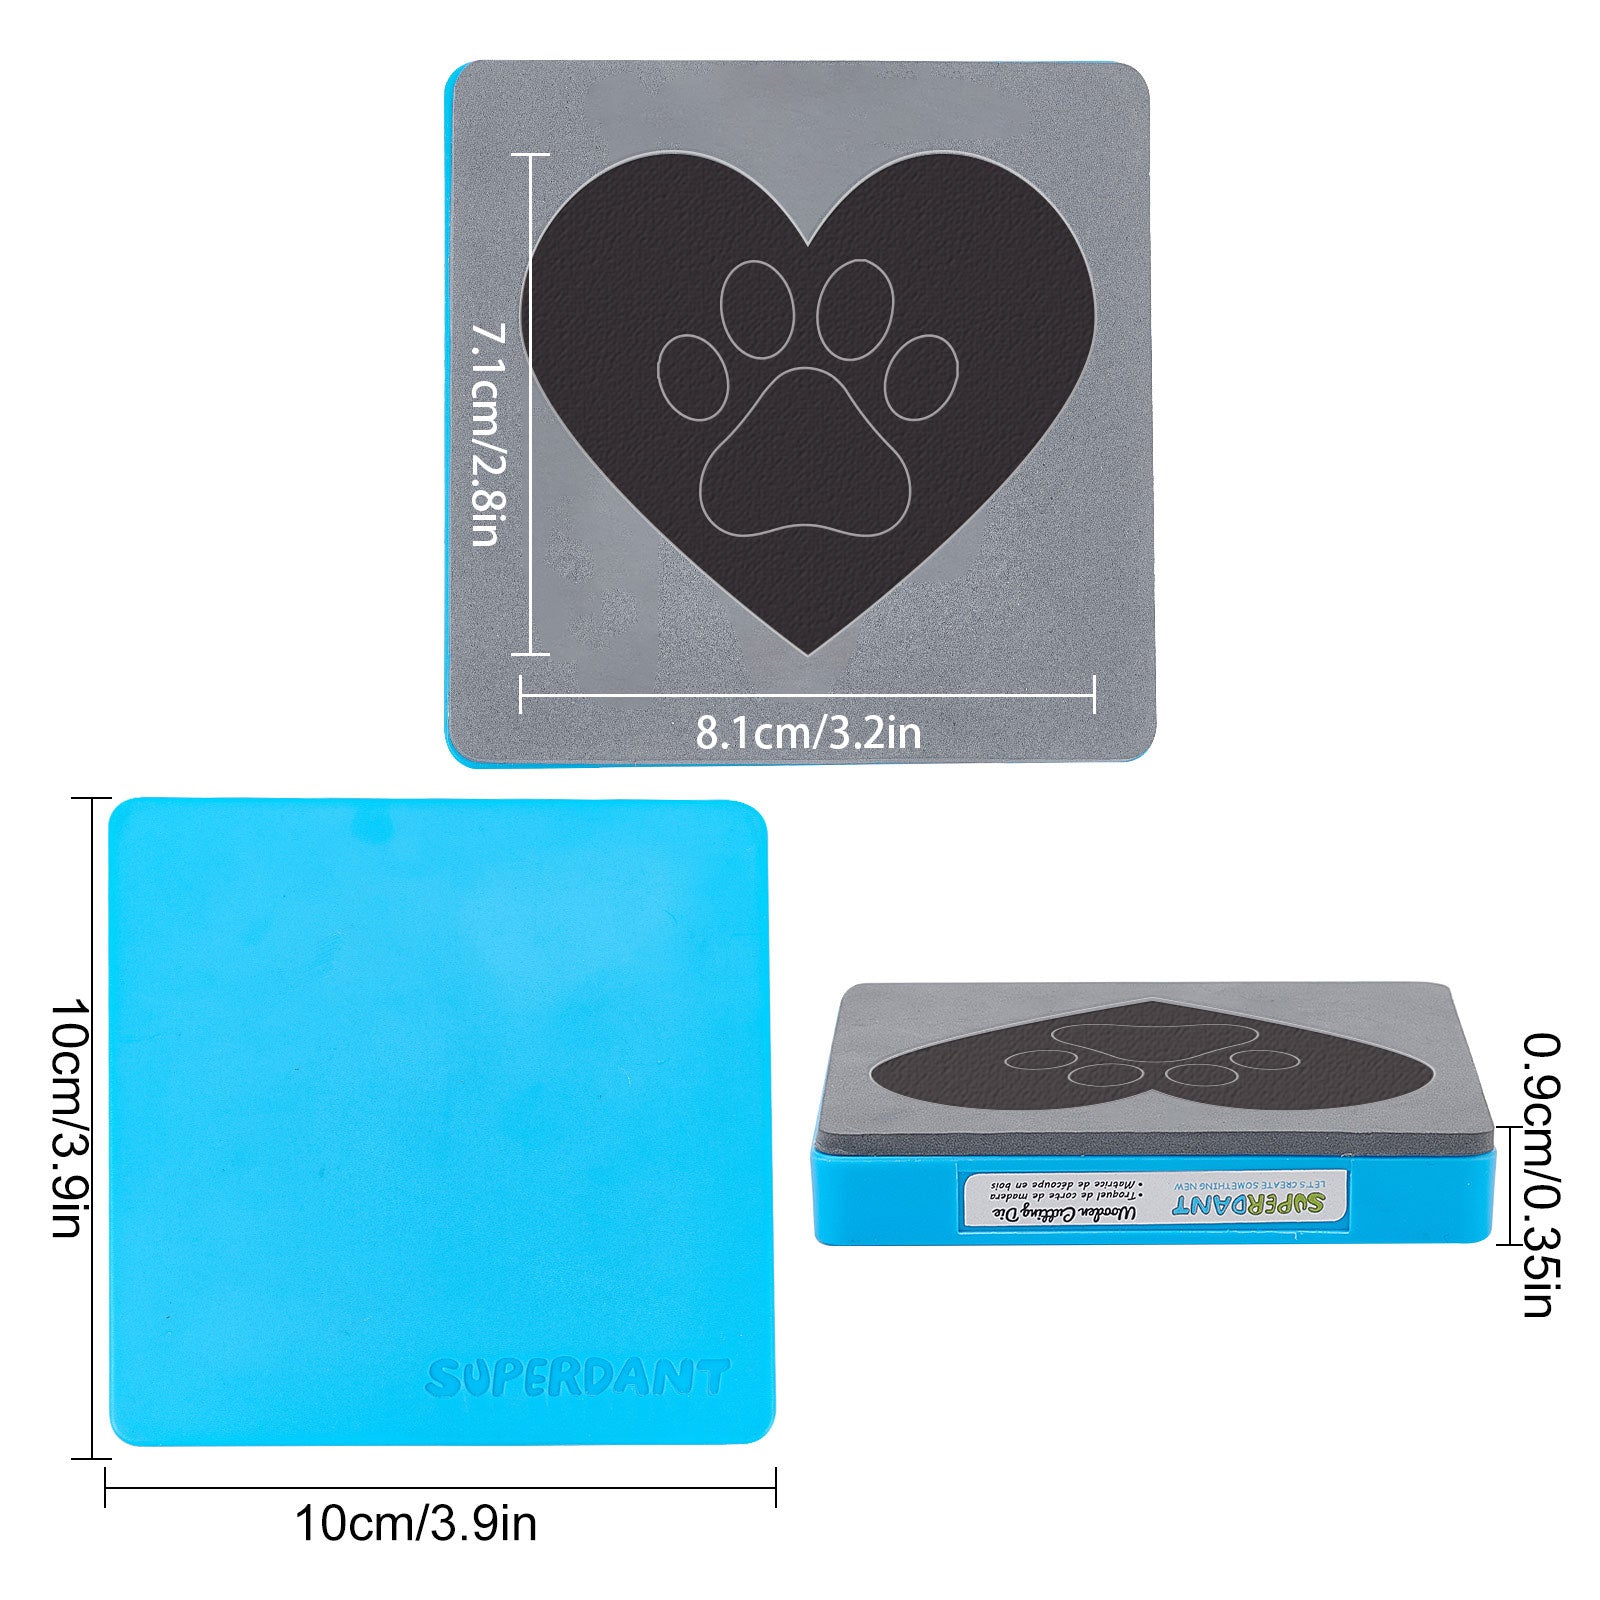 Globleland Leather Cutting Dies Heart Dog Paw Pattern Steel Die Cutting Mould Stencil Leather Plastic Injection Mold for DIY Scrapbooking Photo Album Embossing DIY Paper Card 4x4in